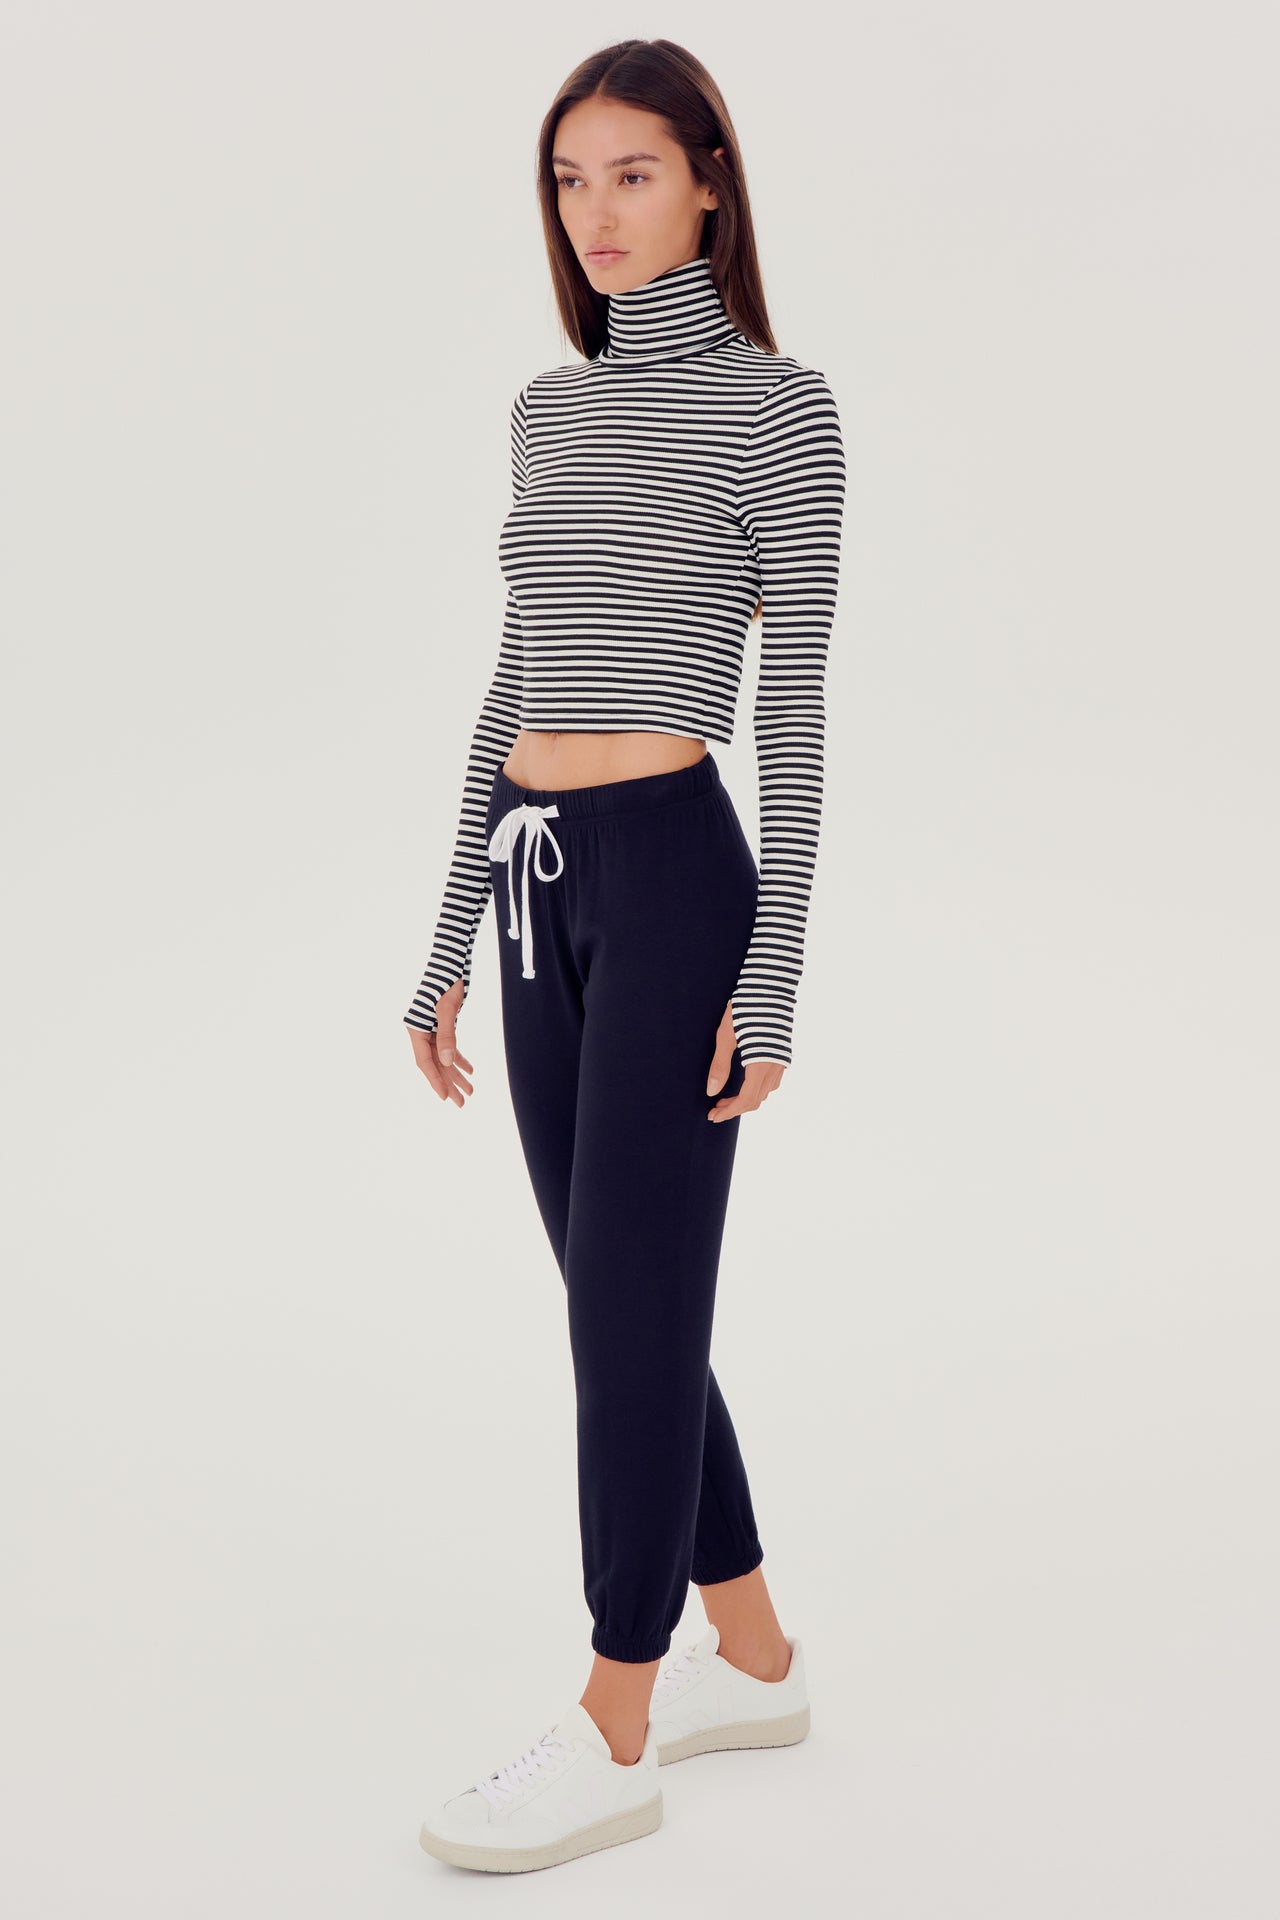 The model is wearing a grey SPLITS59 Jackson Rib Cropped Turtleneck top and high waist black leggings.